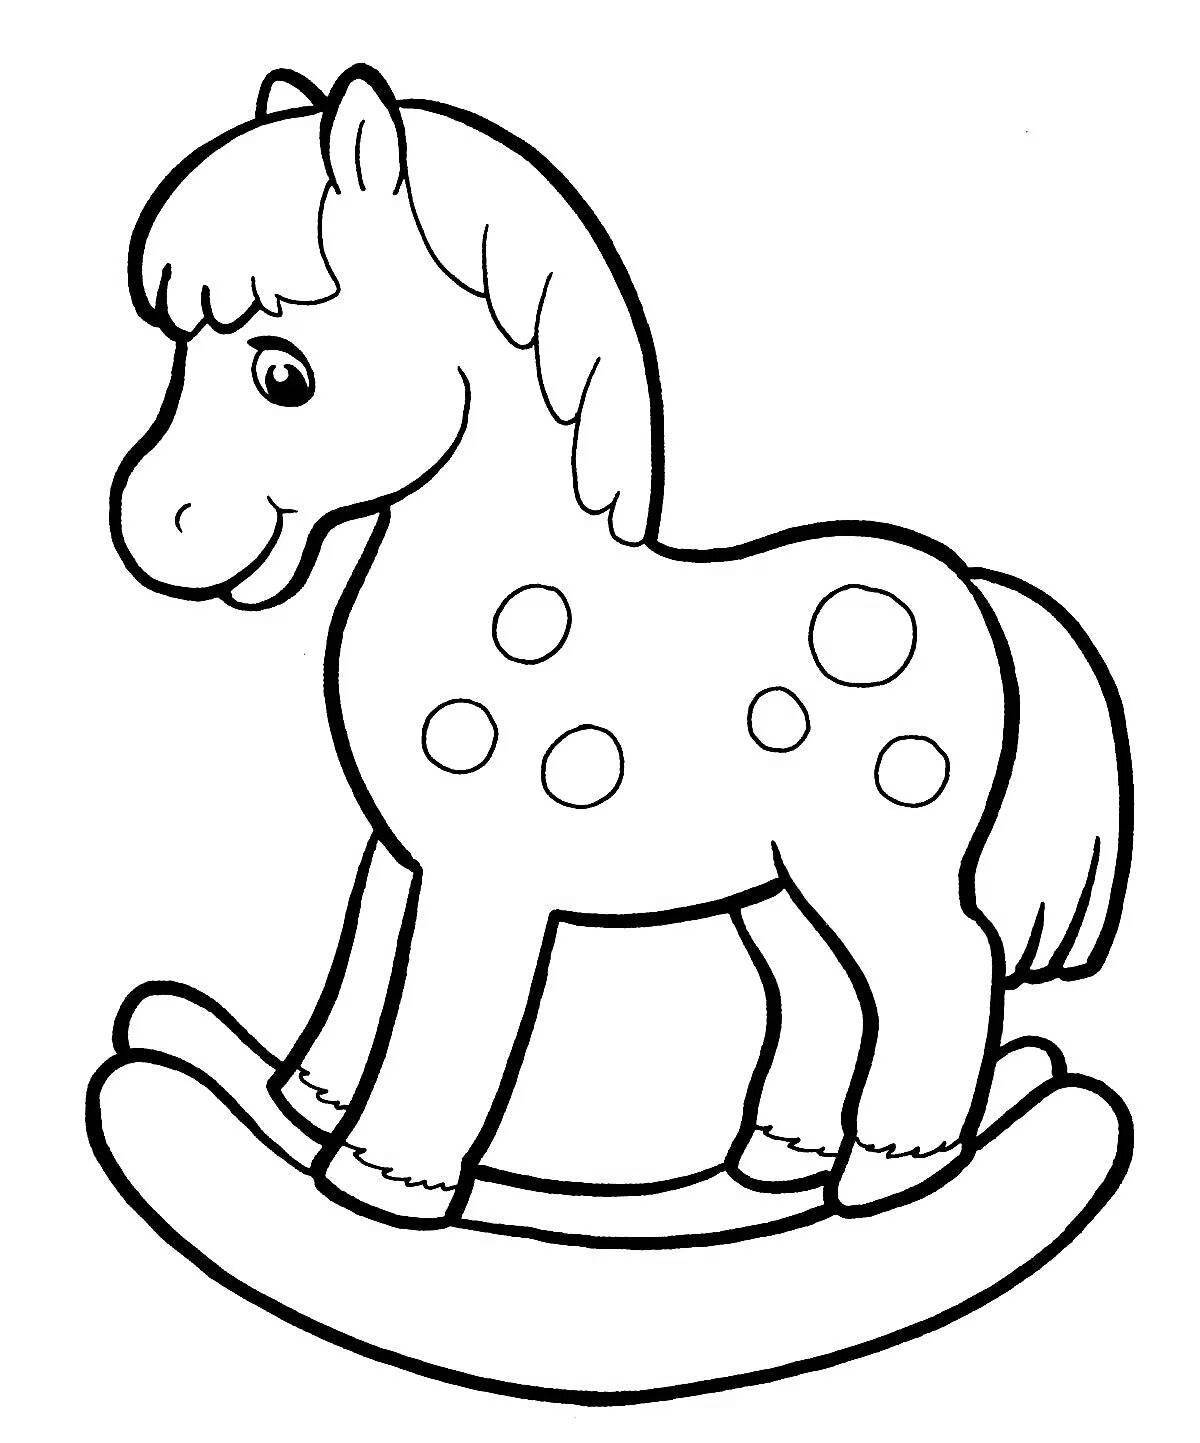 Luminous horse coloring page